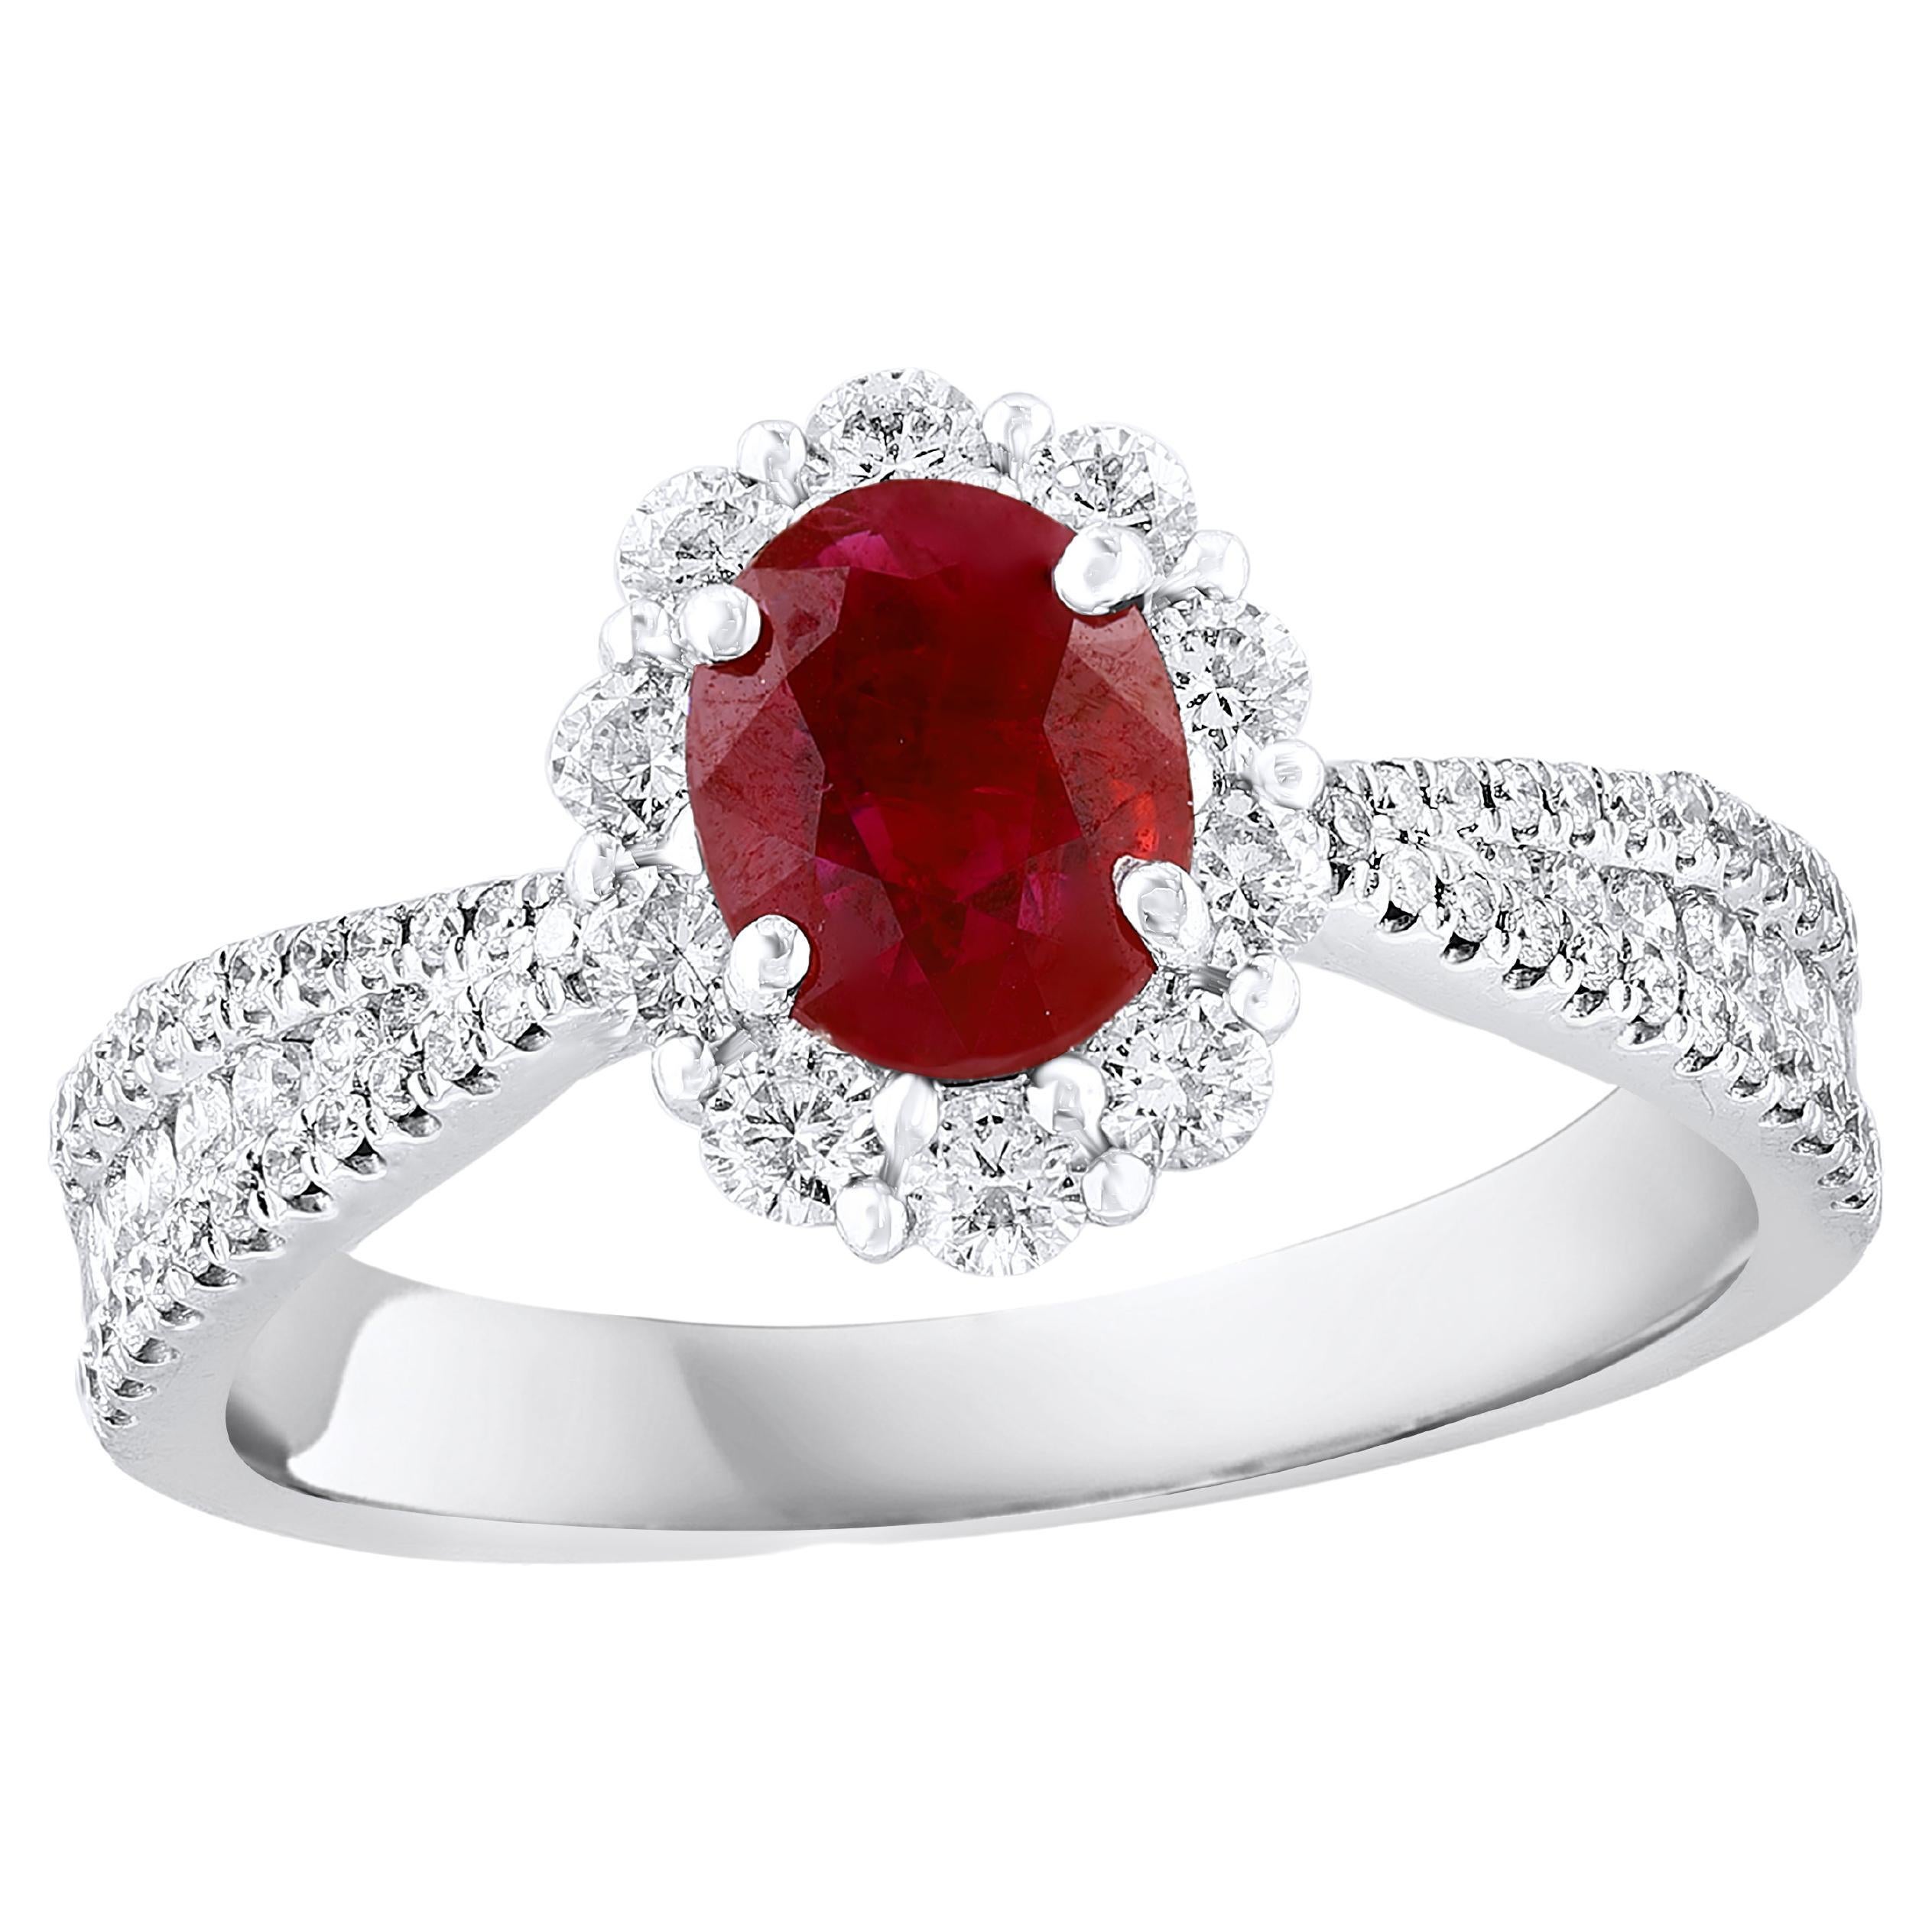 0.80 Carat Oval Cut Ruby and Diamond Engagement Ring in 18K White Gold